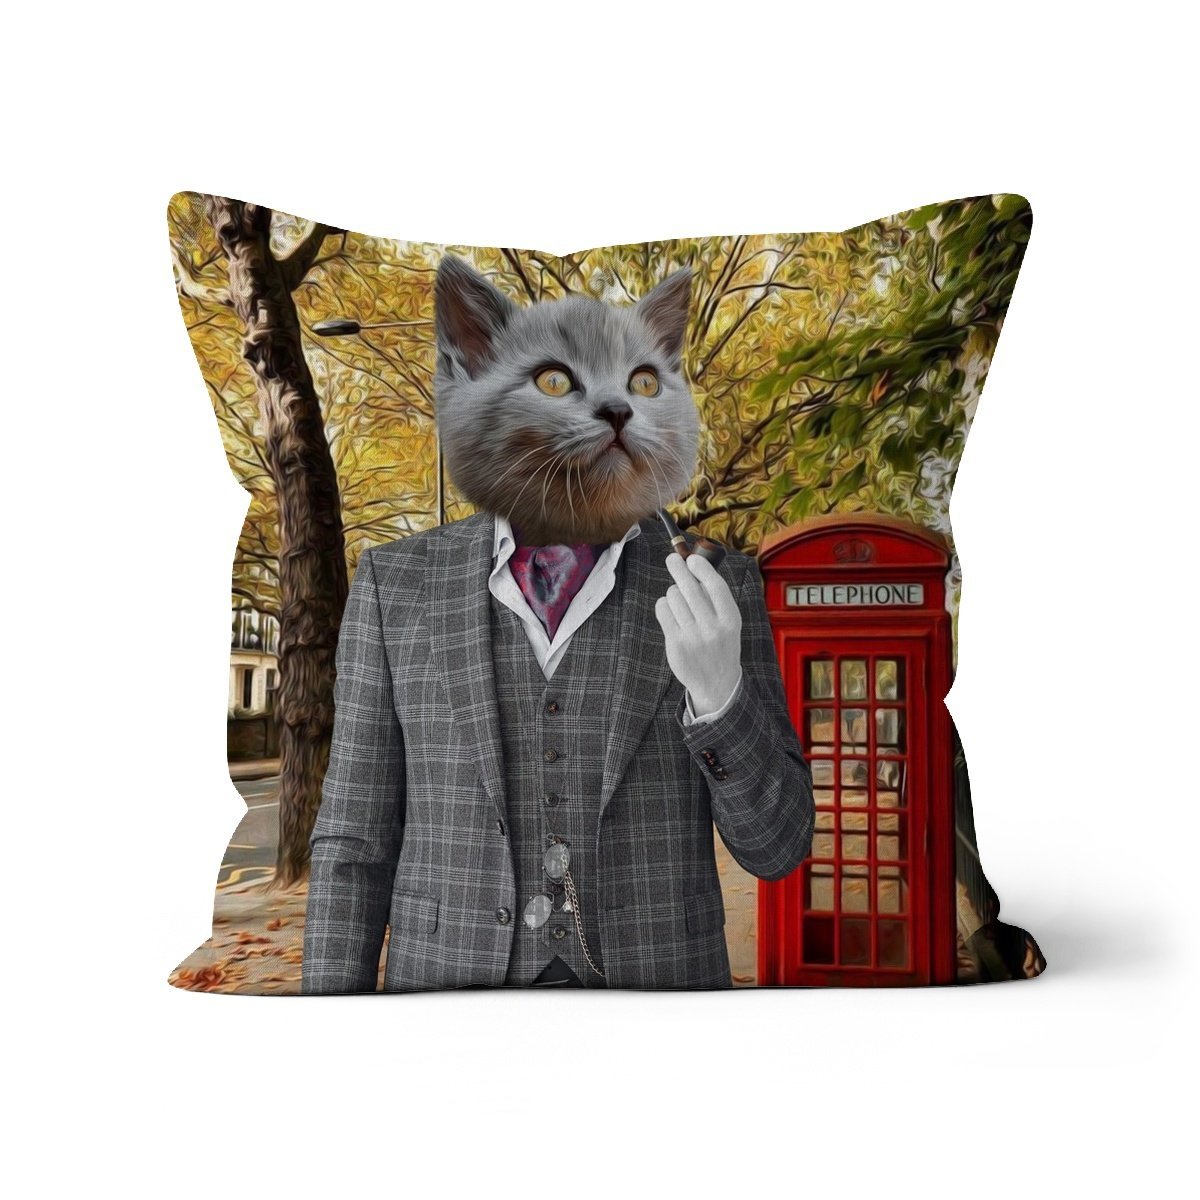 The English Gent: Custom Pet Cushion - Paw & Glory - #pet portraits# - #dog portraits# - #pet portraits uk#paw & glory, custom pet portrait pillow,pet face pillows, personalised pet pillows, pillows with dogs picture, custom pet pillows, pet print pillow